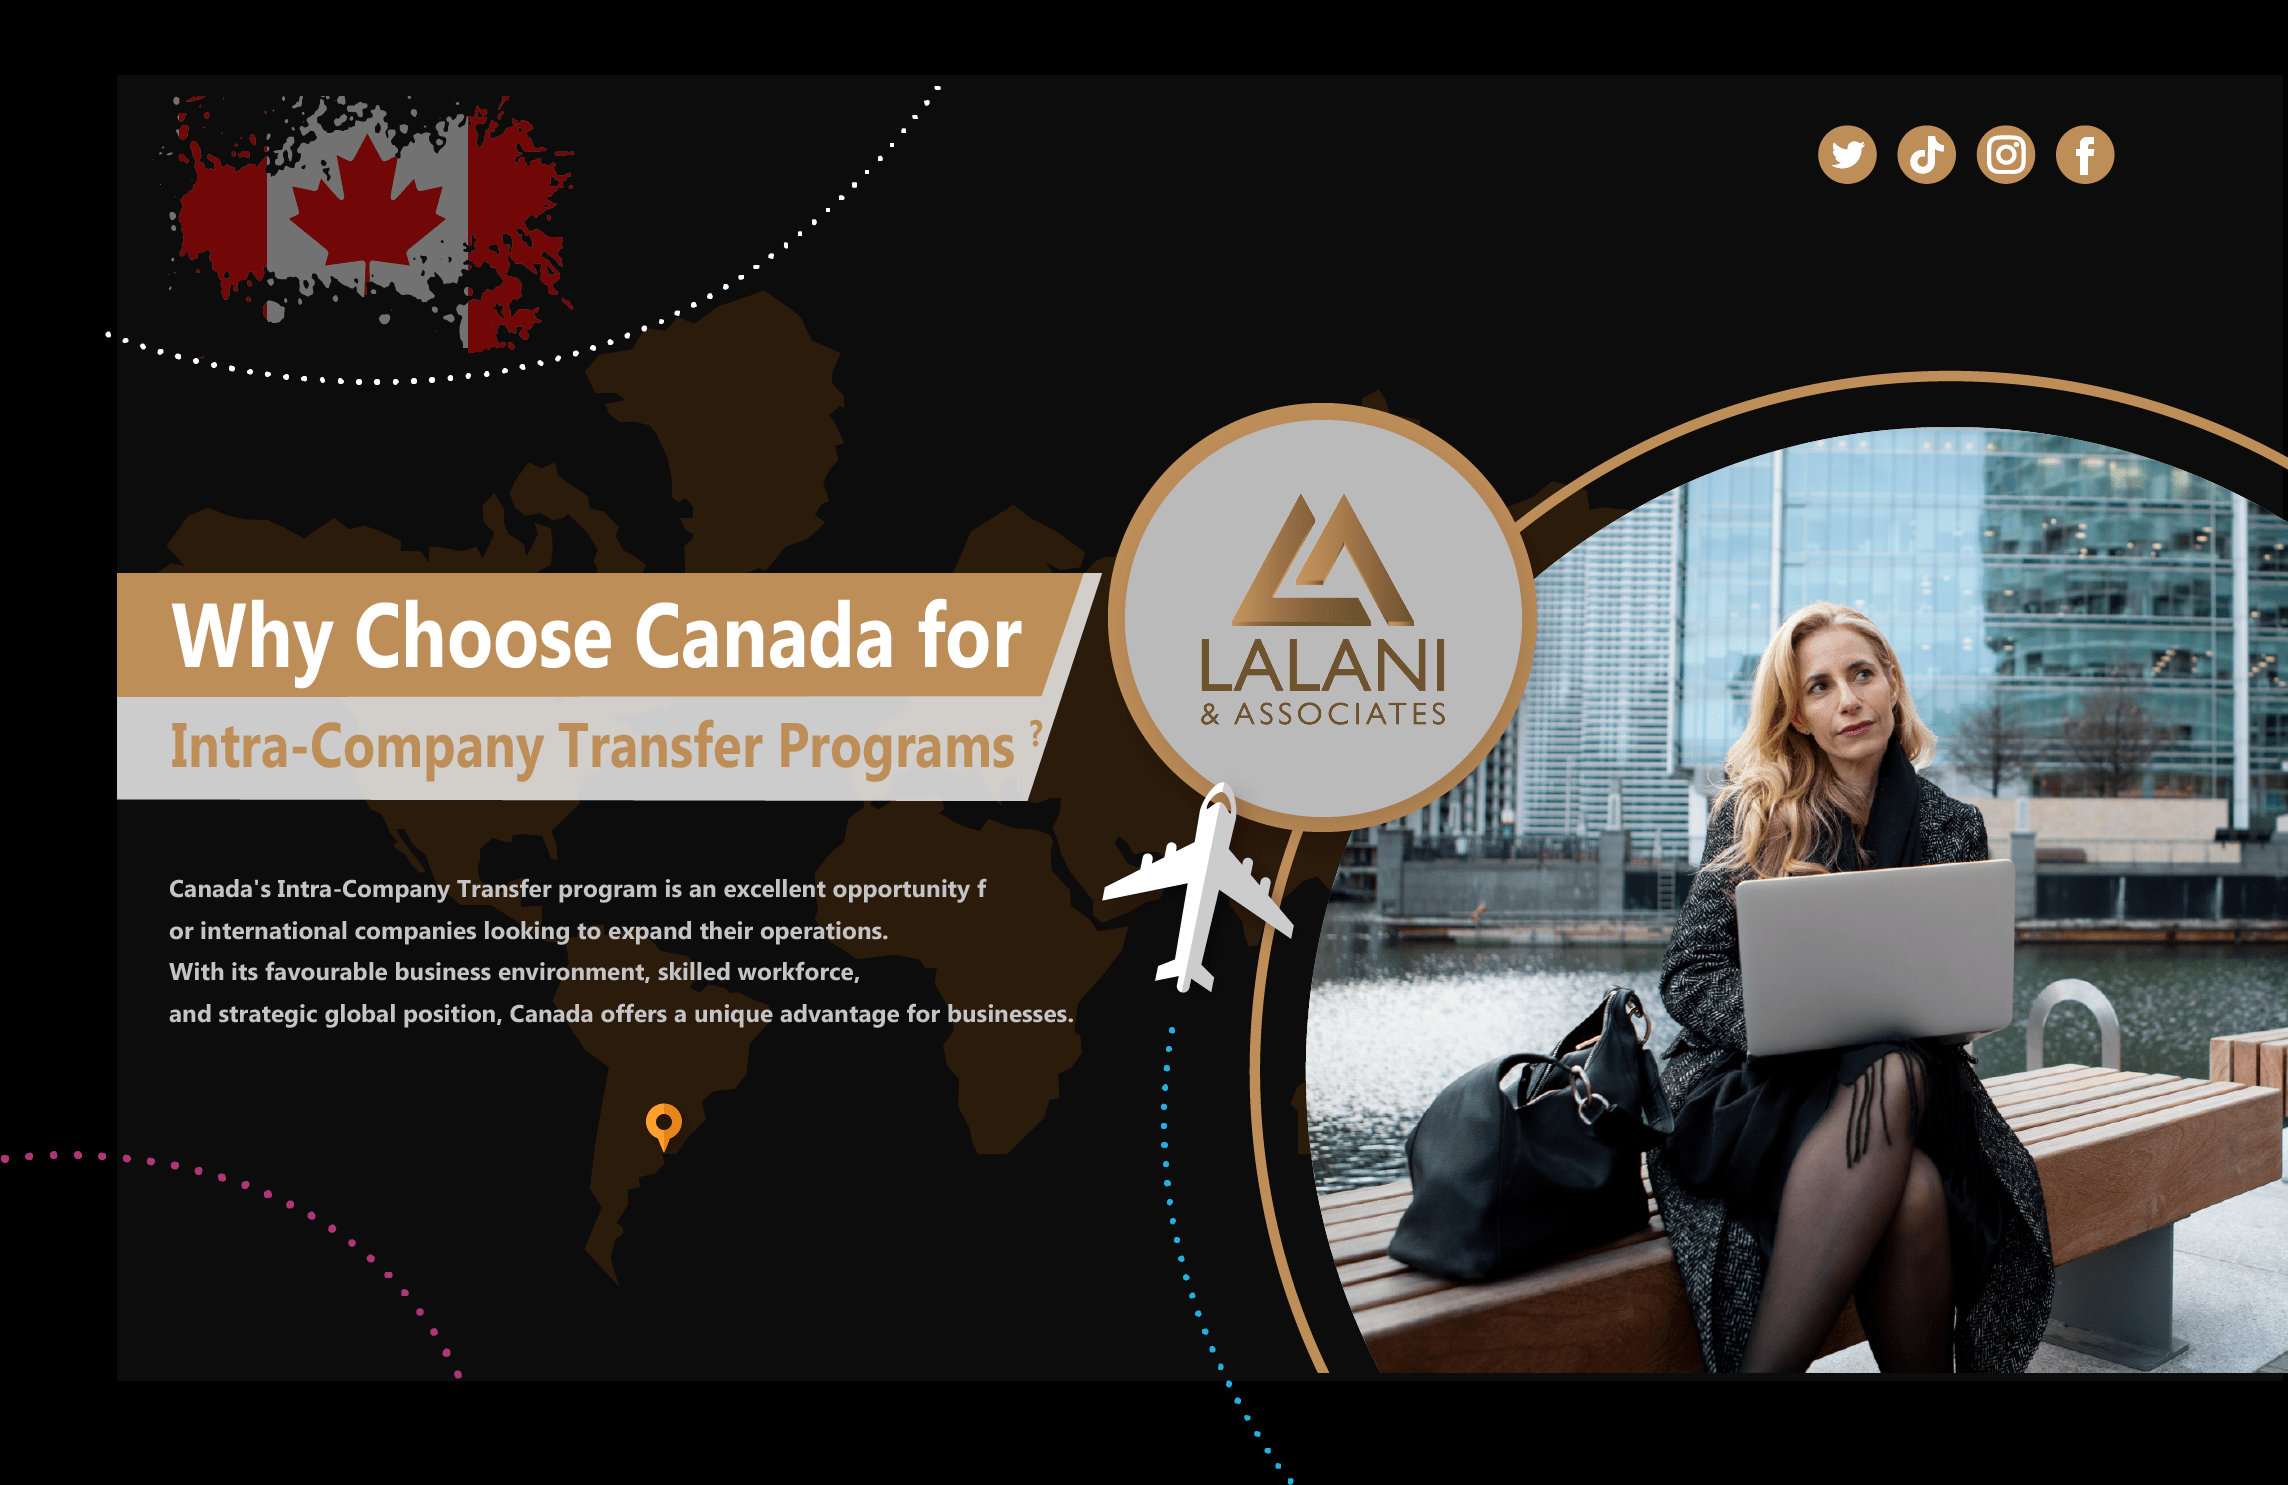 Why Choose Canada for Intra-Company Transfer Programs?